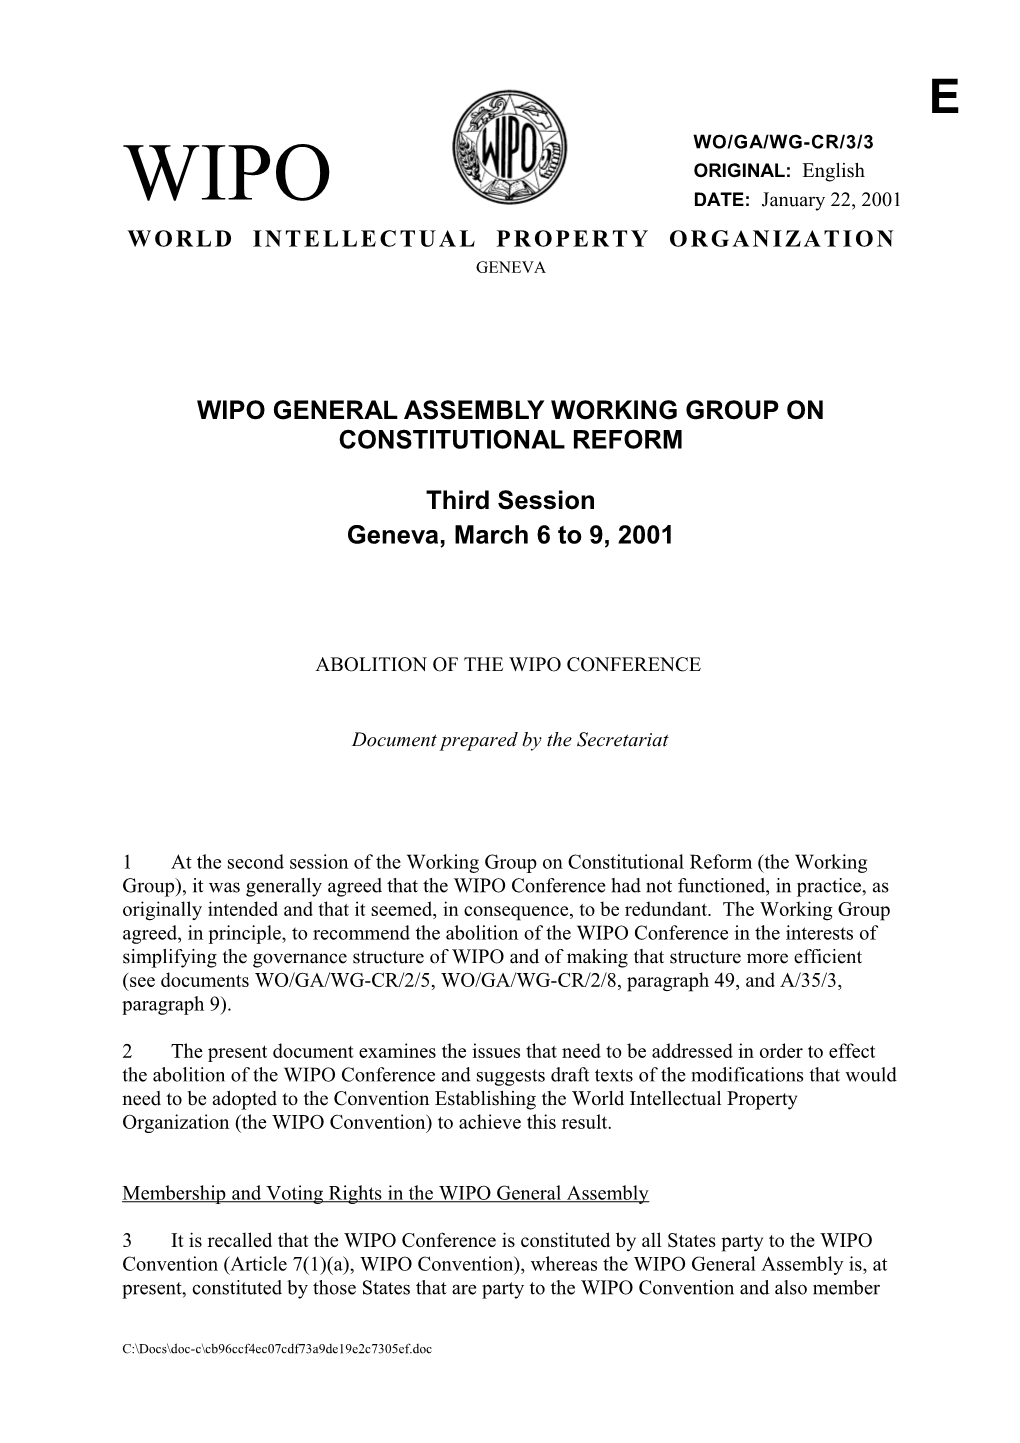 WO/GA/WG-CR/3/3: Abolition of the WIPO Conference